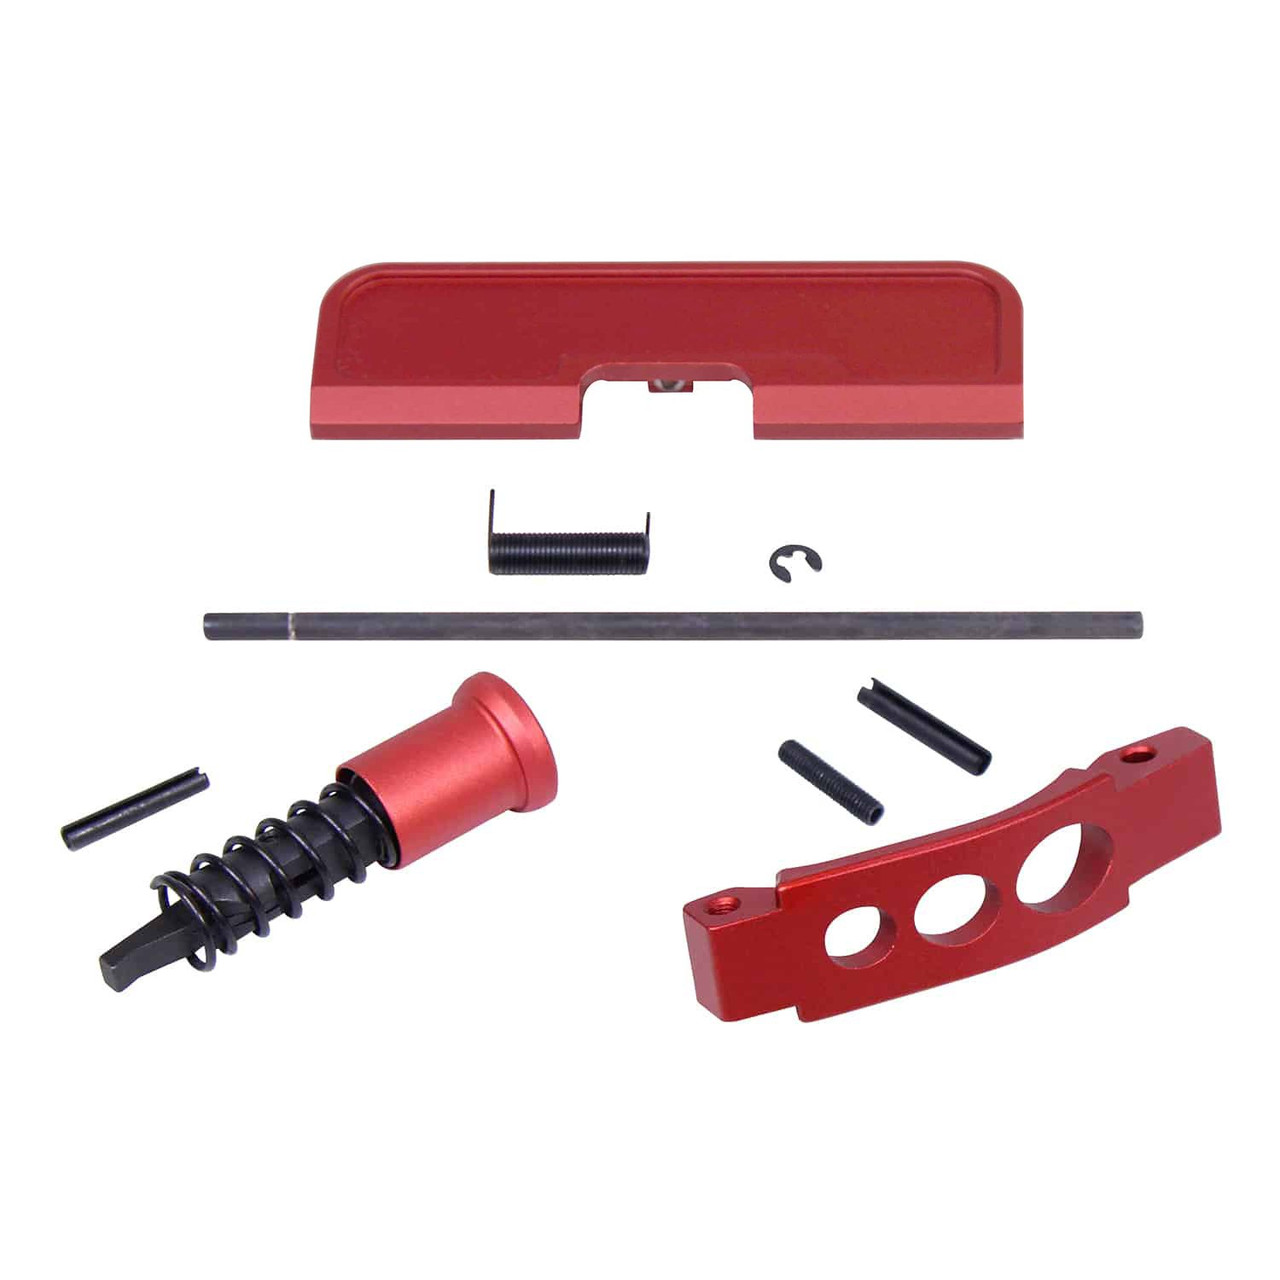 Guntec USA ARC-KIT-RED AR-15 Receiver Build Kit (Anodized Red)